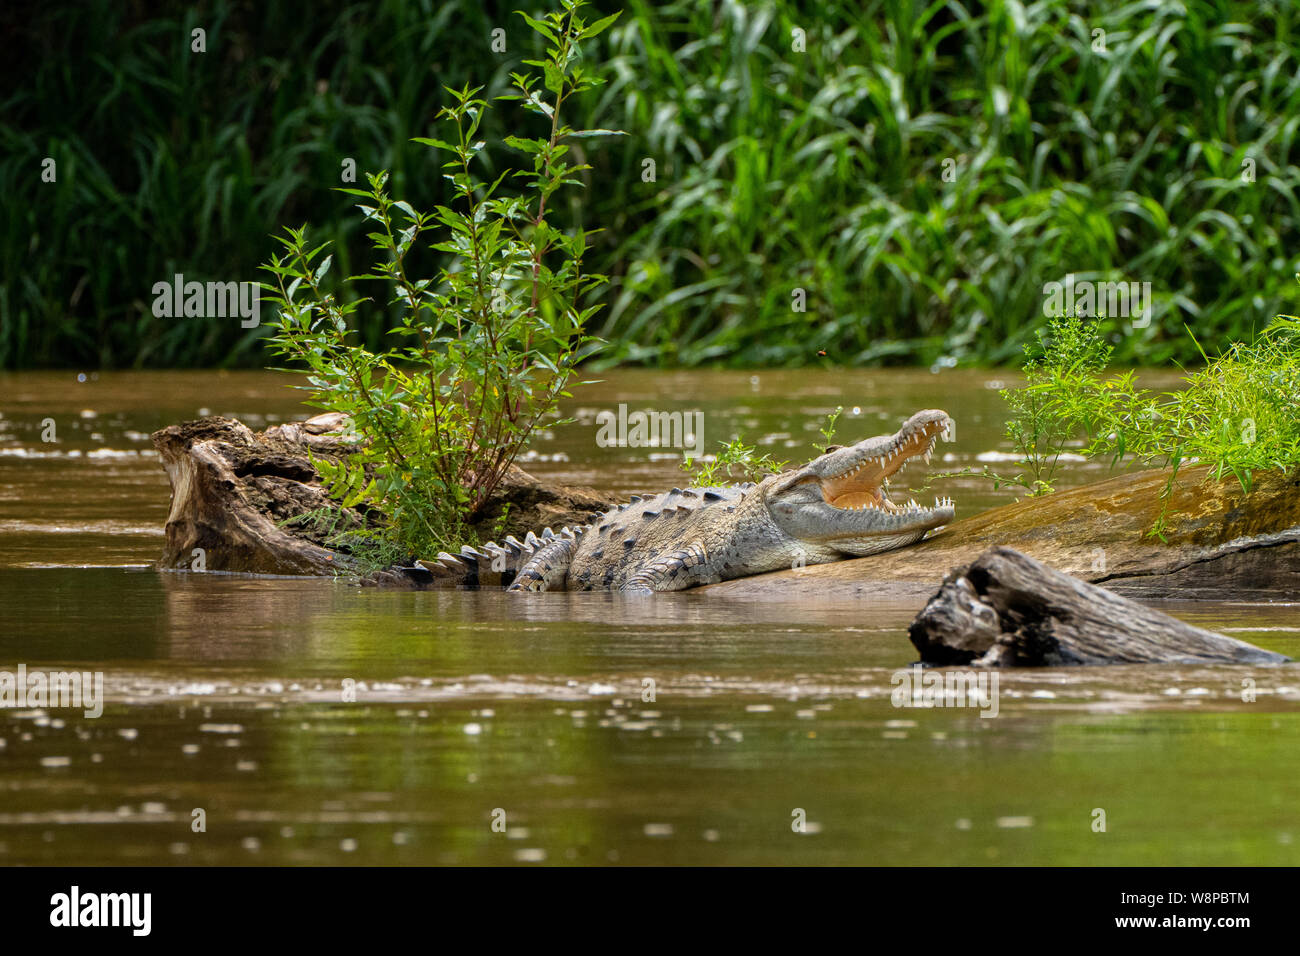 The American crocodile is a large crocodilian that can reach lengths up to 7 metres (4 m being average adult size) Stock Photo